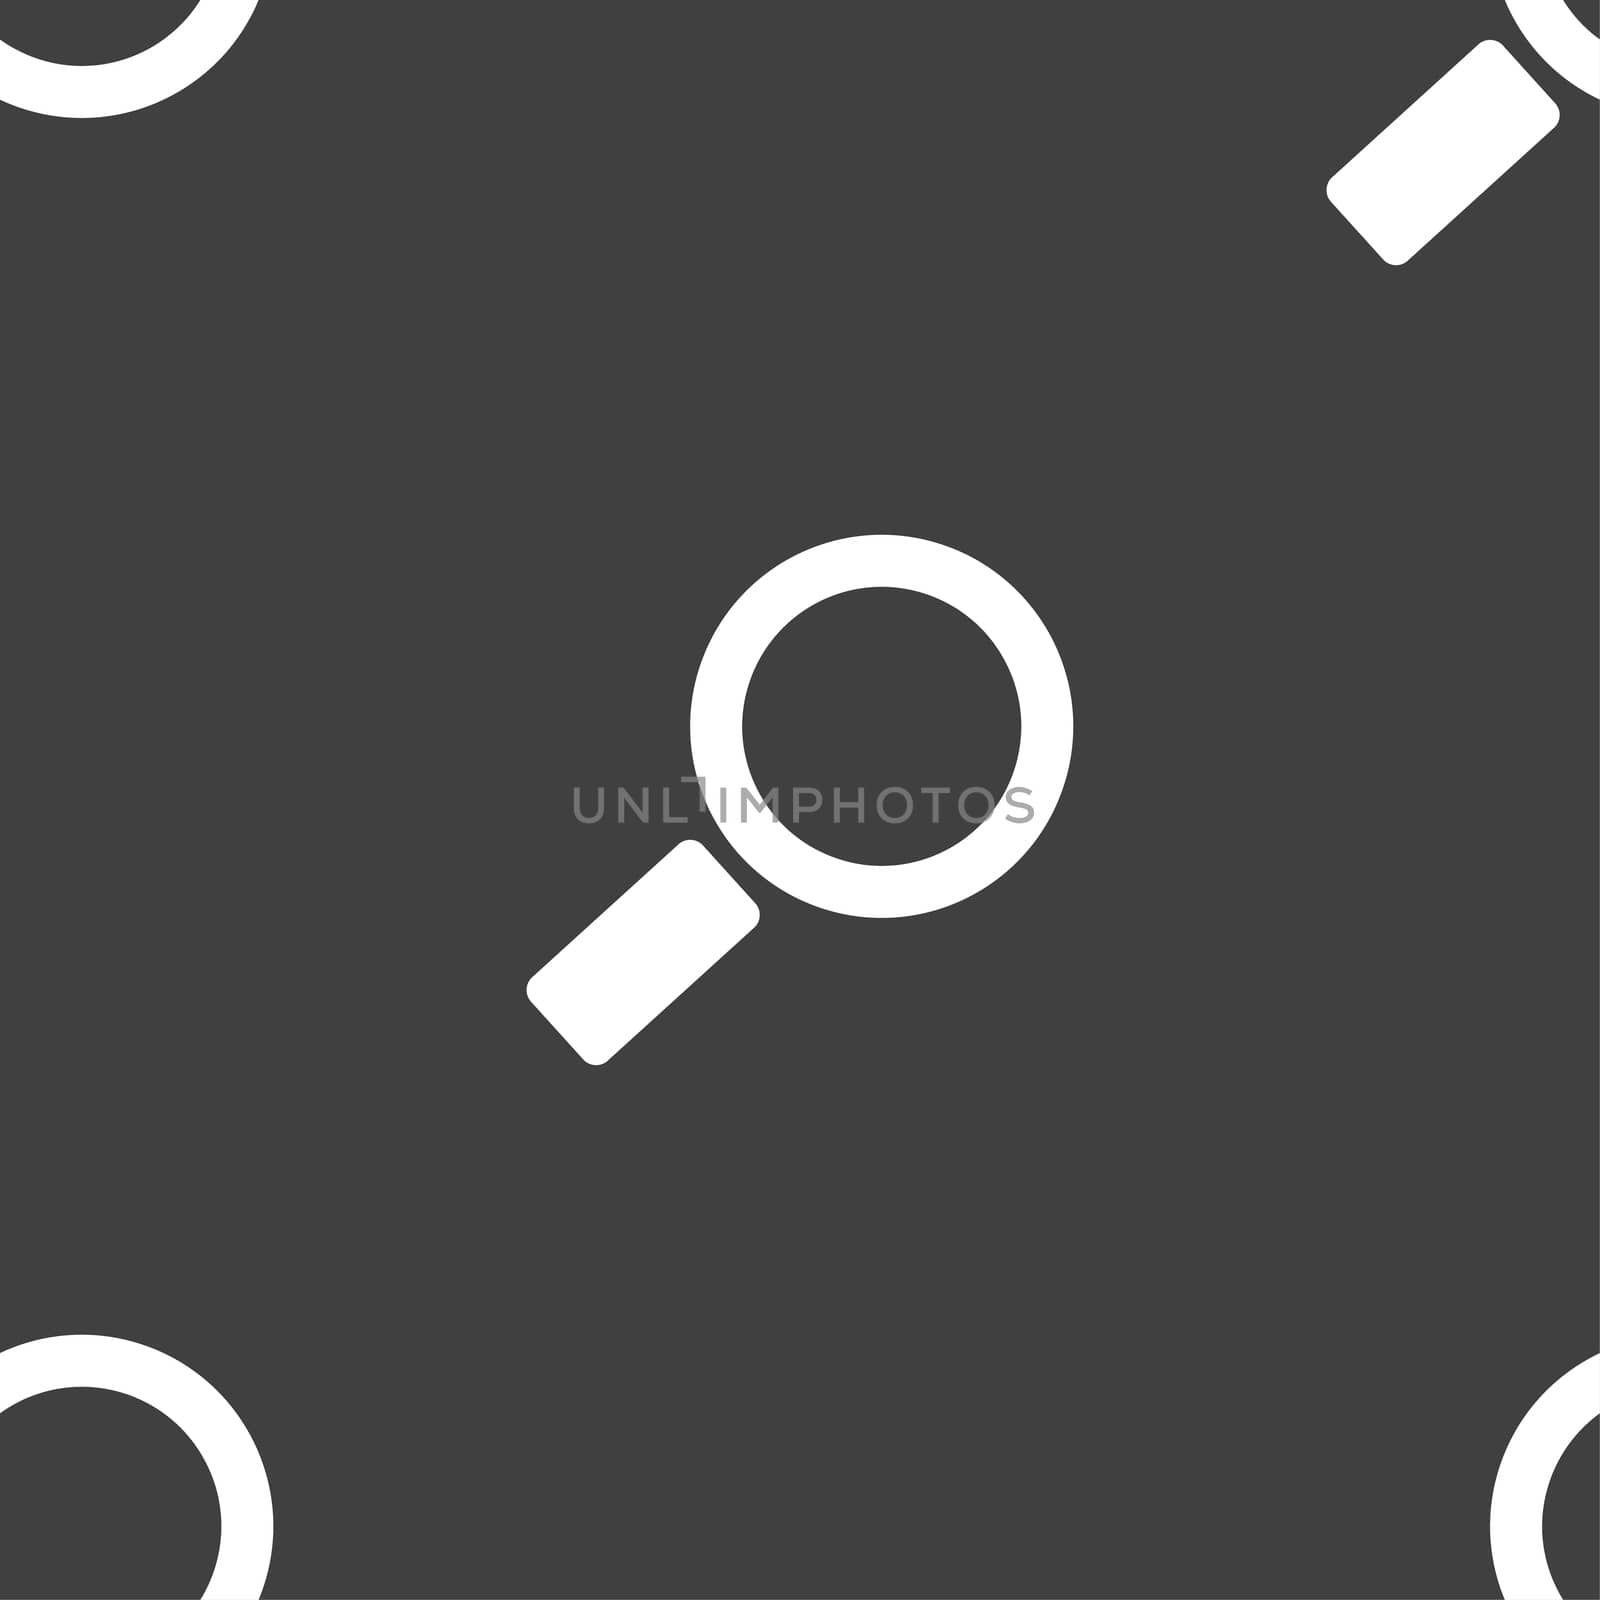 Magnifier glass sign icon. Zoom tool button. Navigation search symbol. Seamless pattern on a gray background. illustration